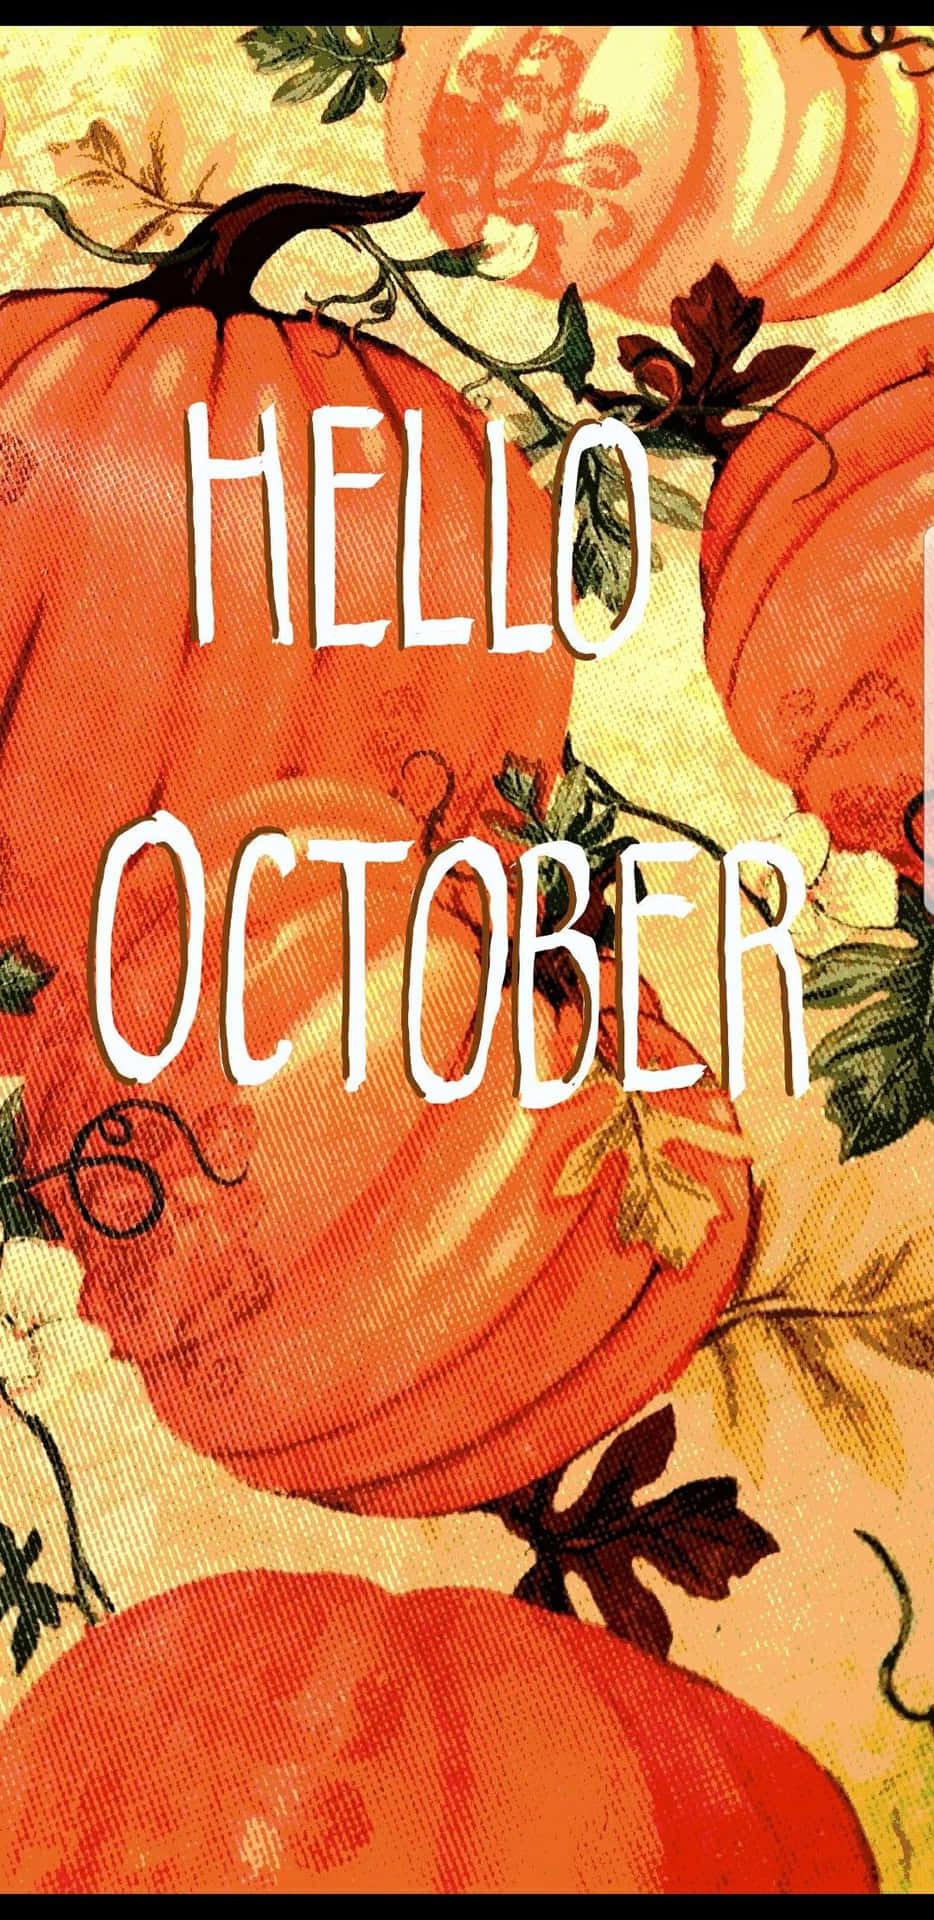 Welcome October with a Festive Pumpkin Display Wallpaper